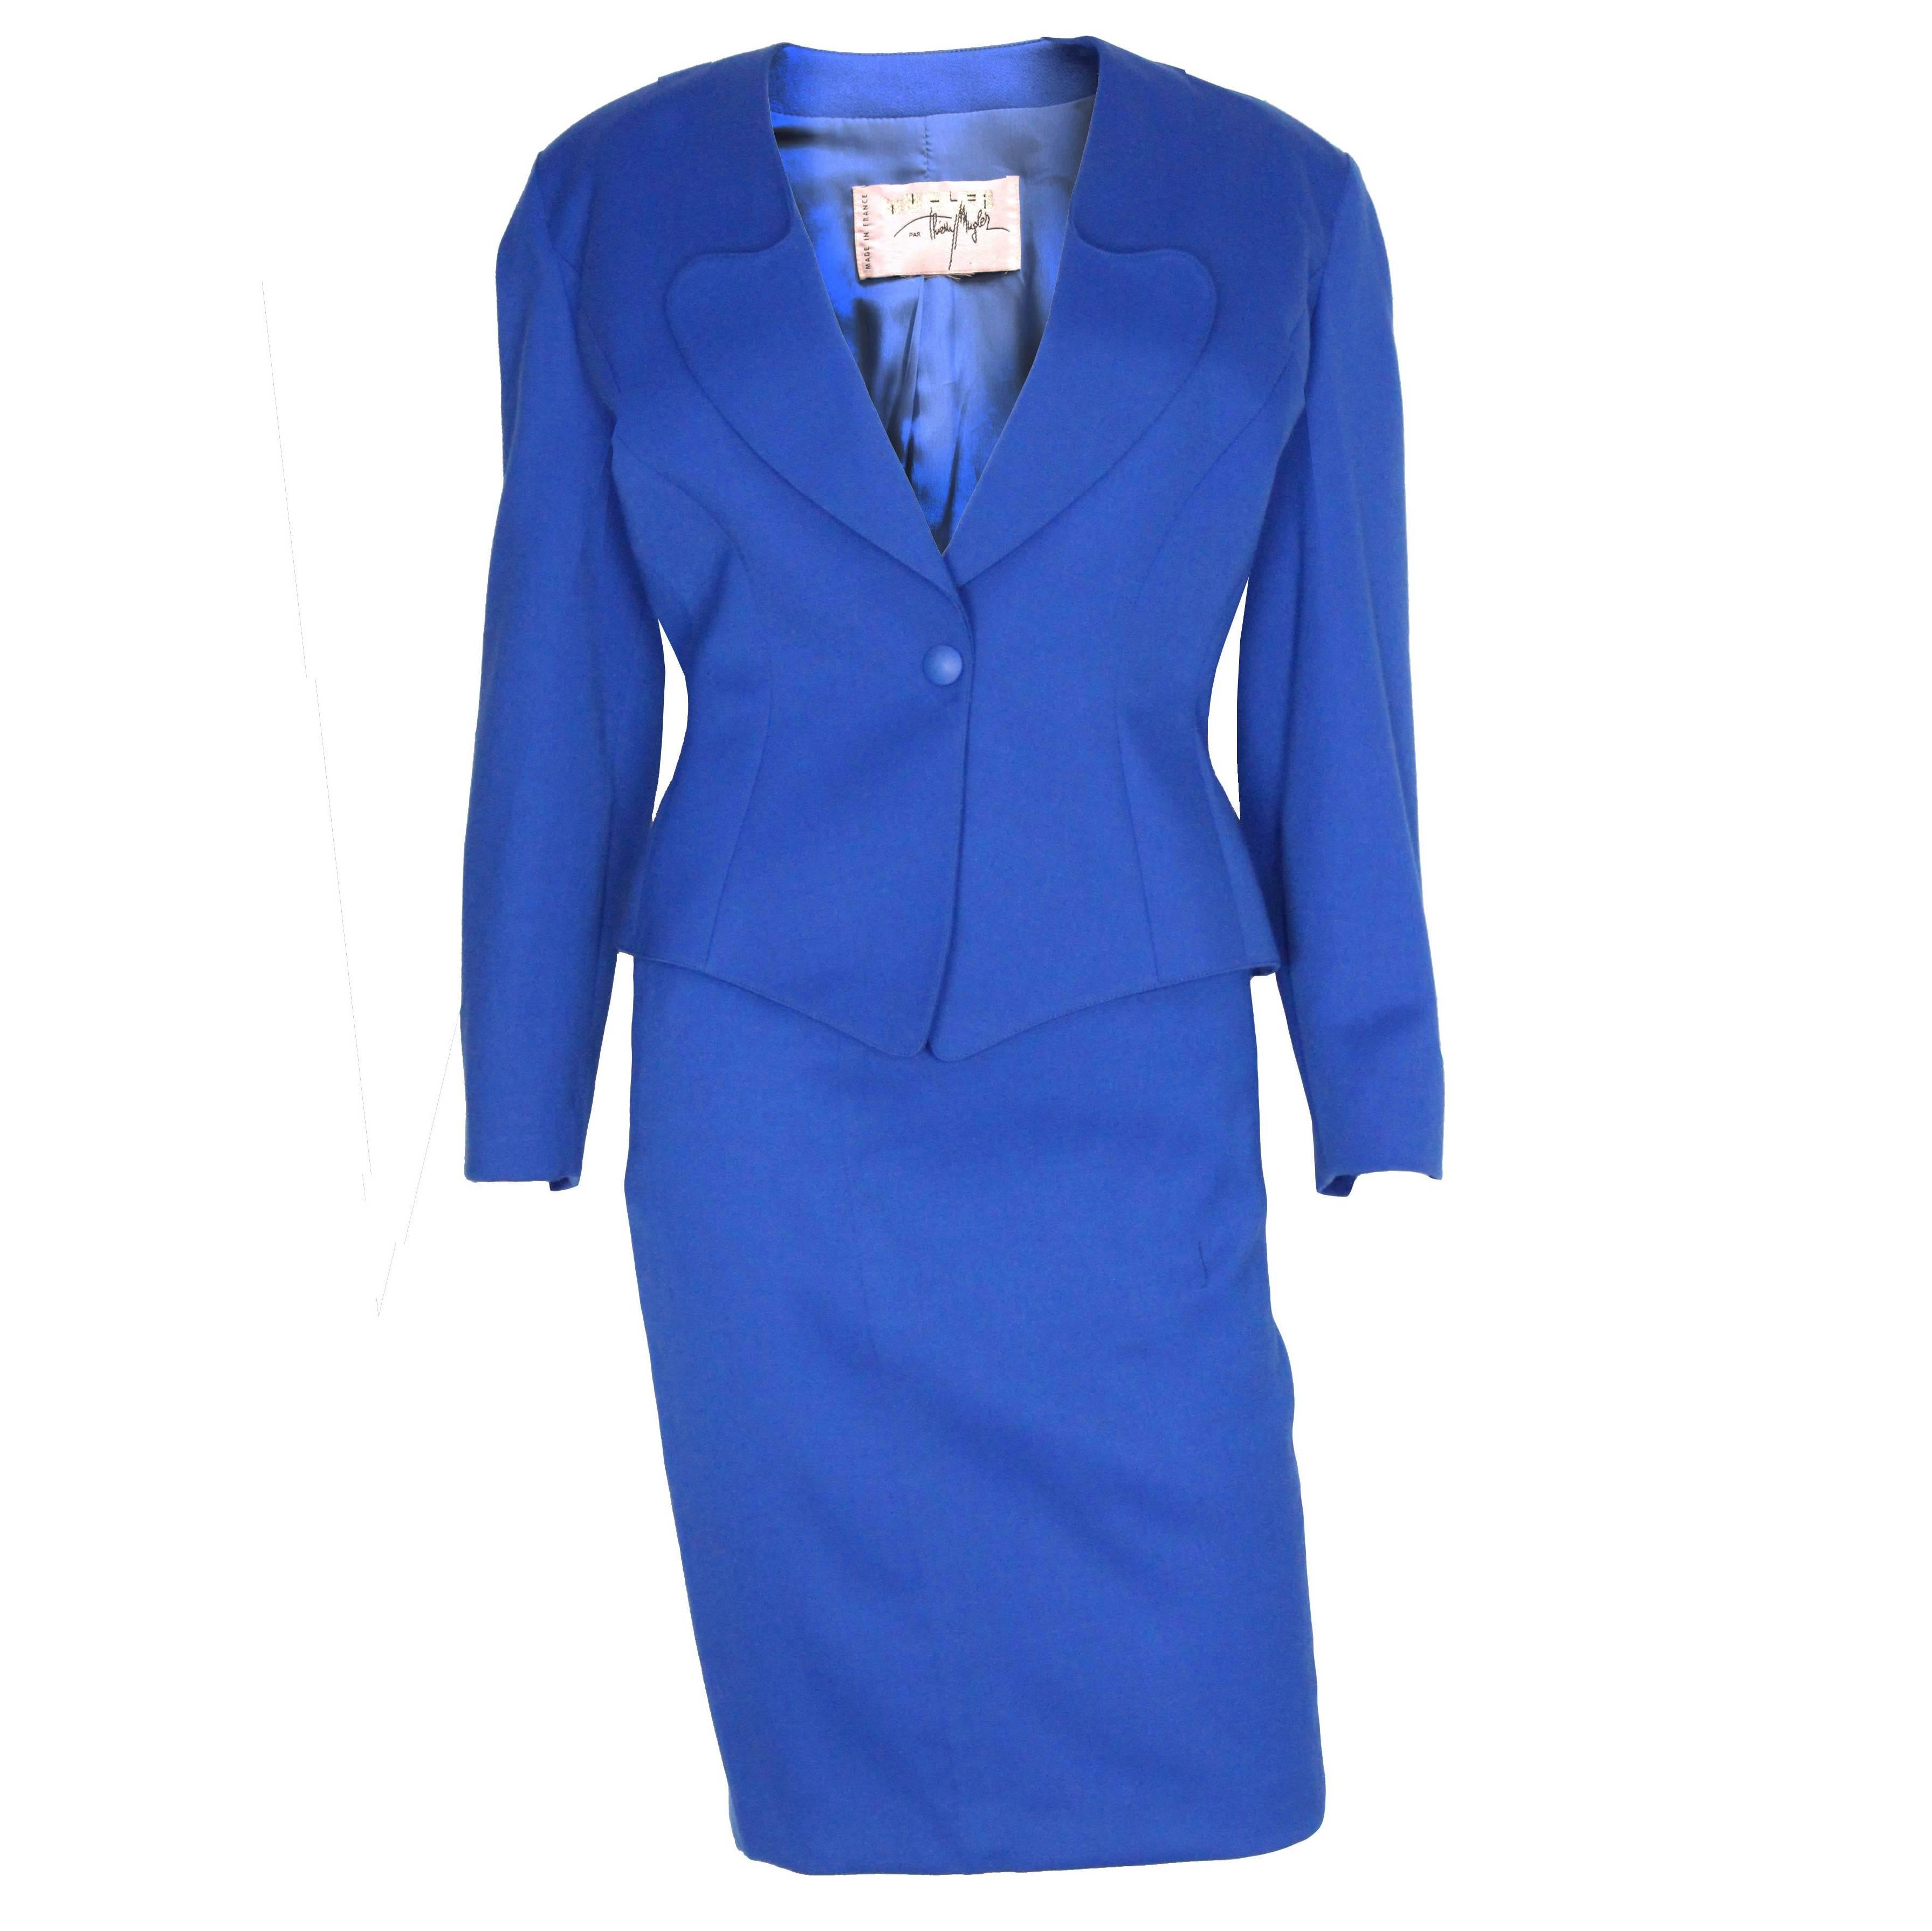 Vintage 1980s Electric Blue Suit jacket and skirt by Thierry Mugler